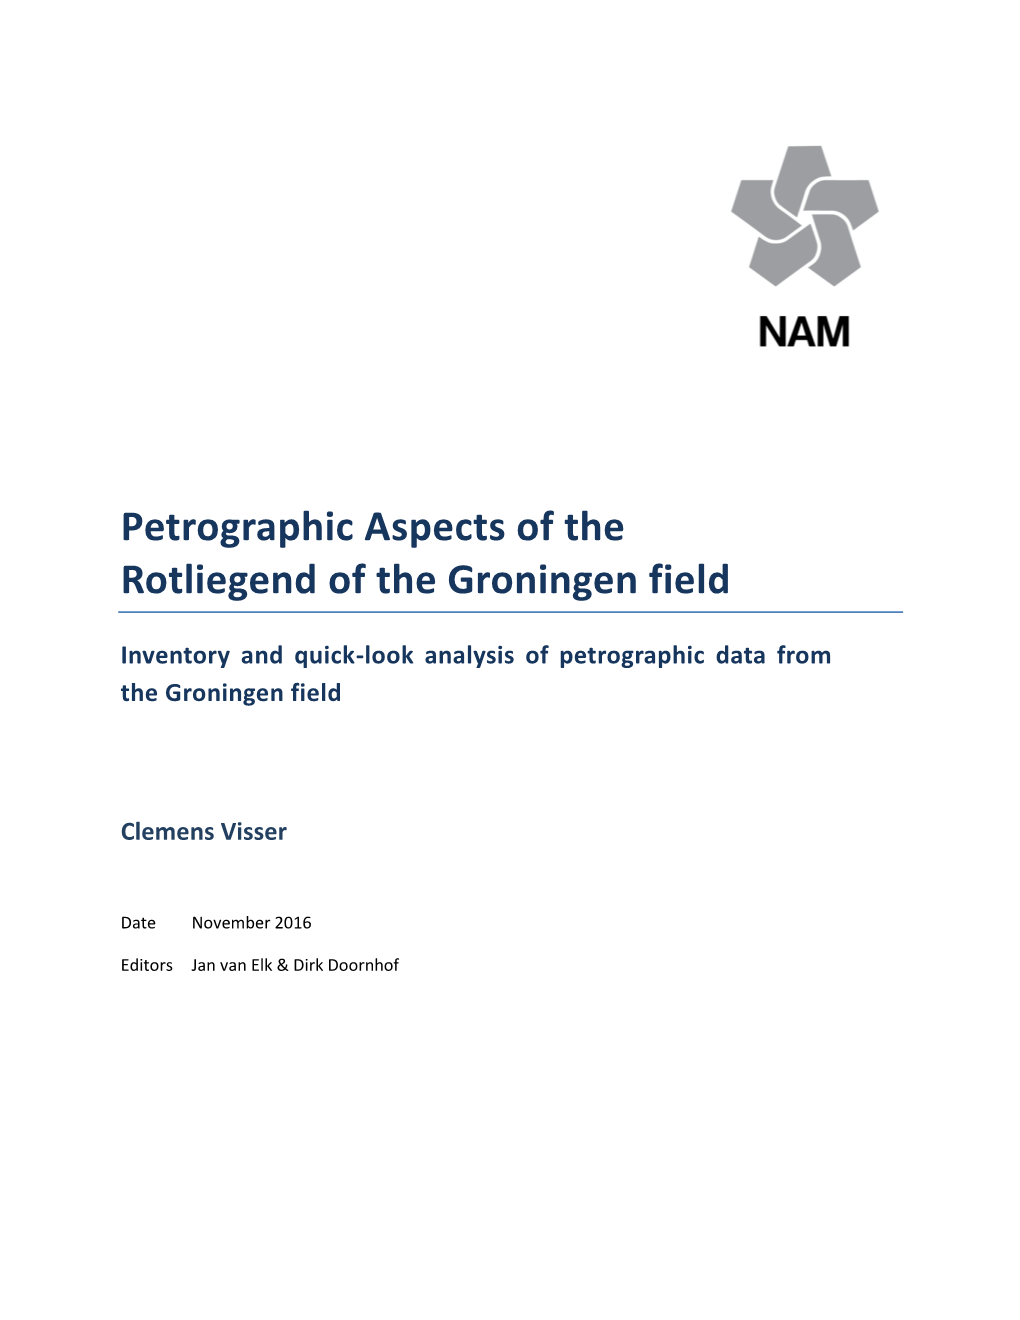 Petrographic Aspects of the Rotliegend of the Groningen Field